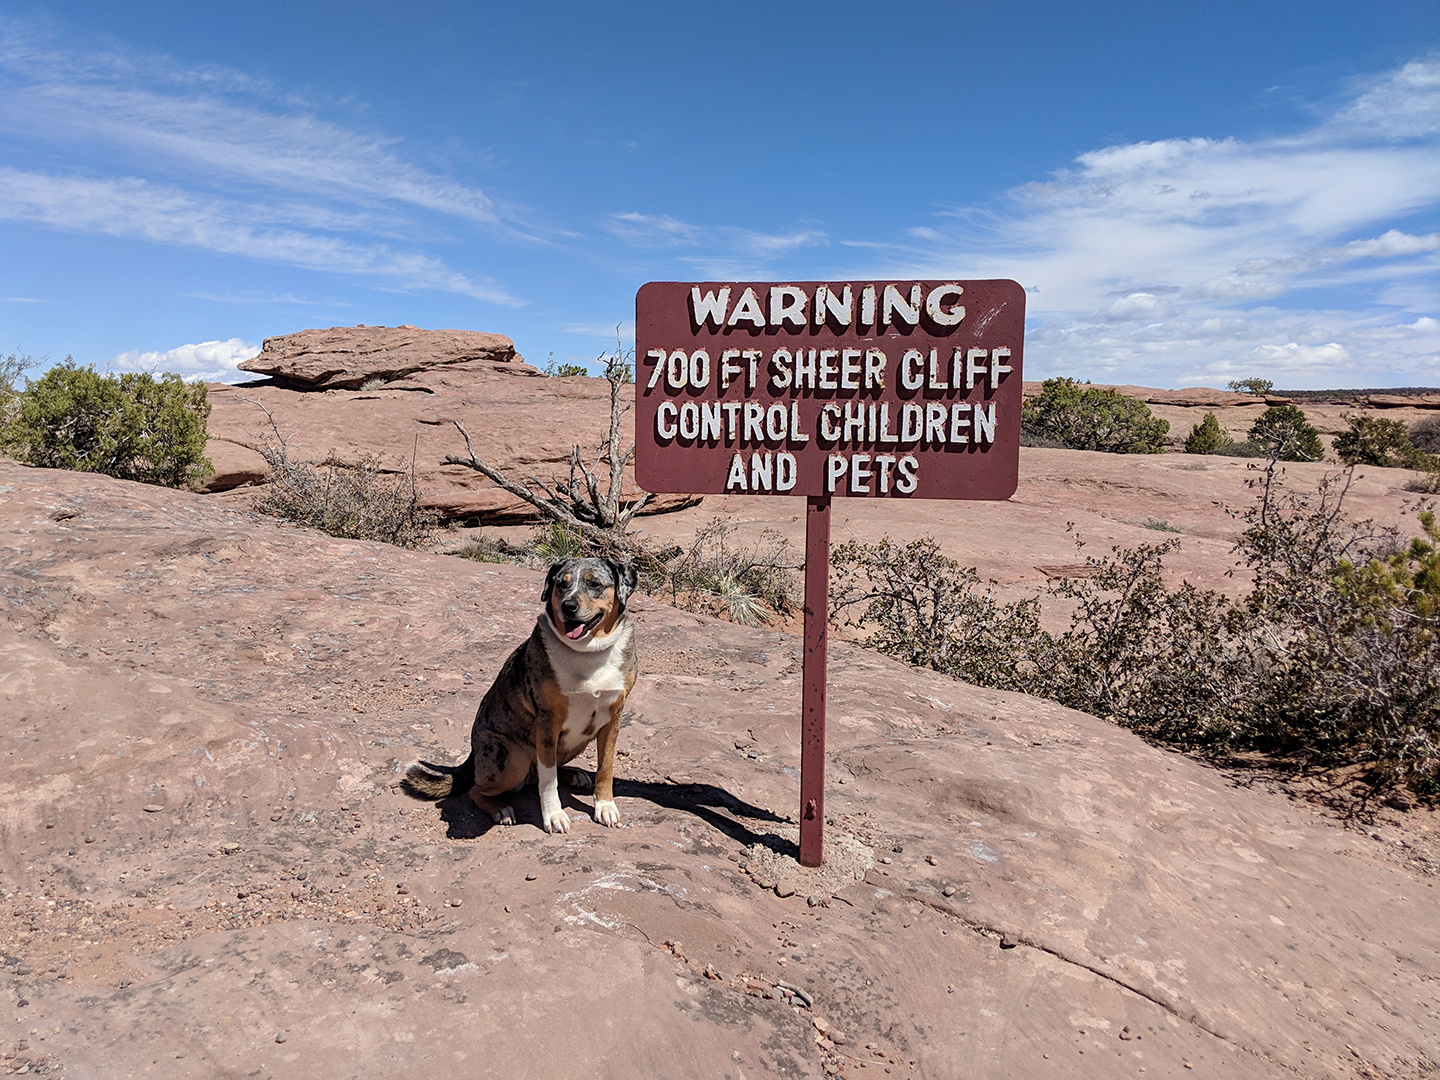 Canyon de Chelly overlook trail